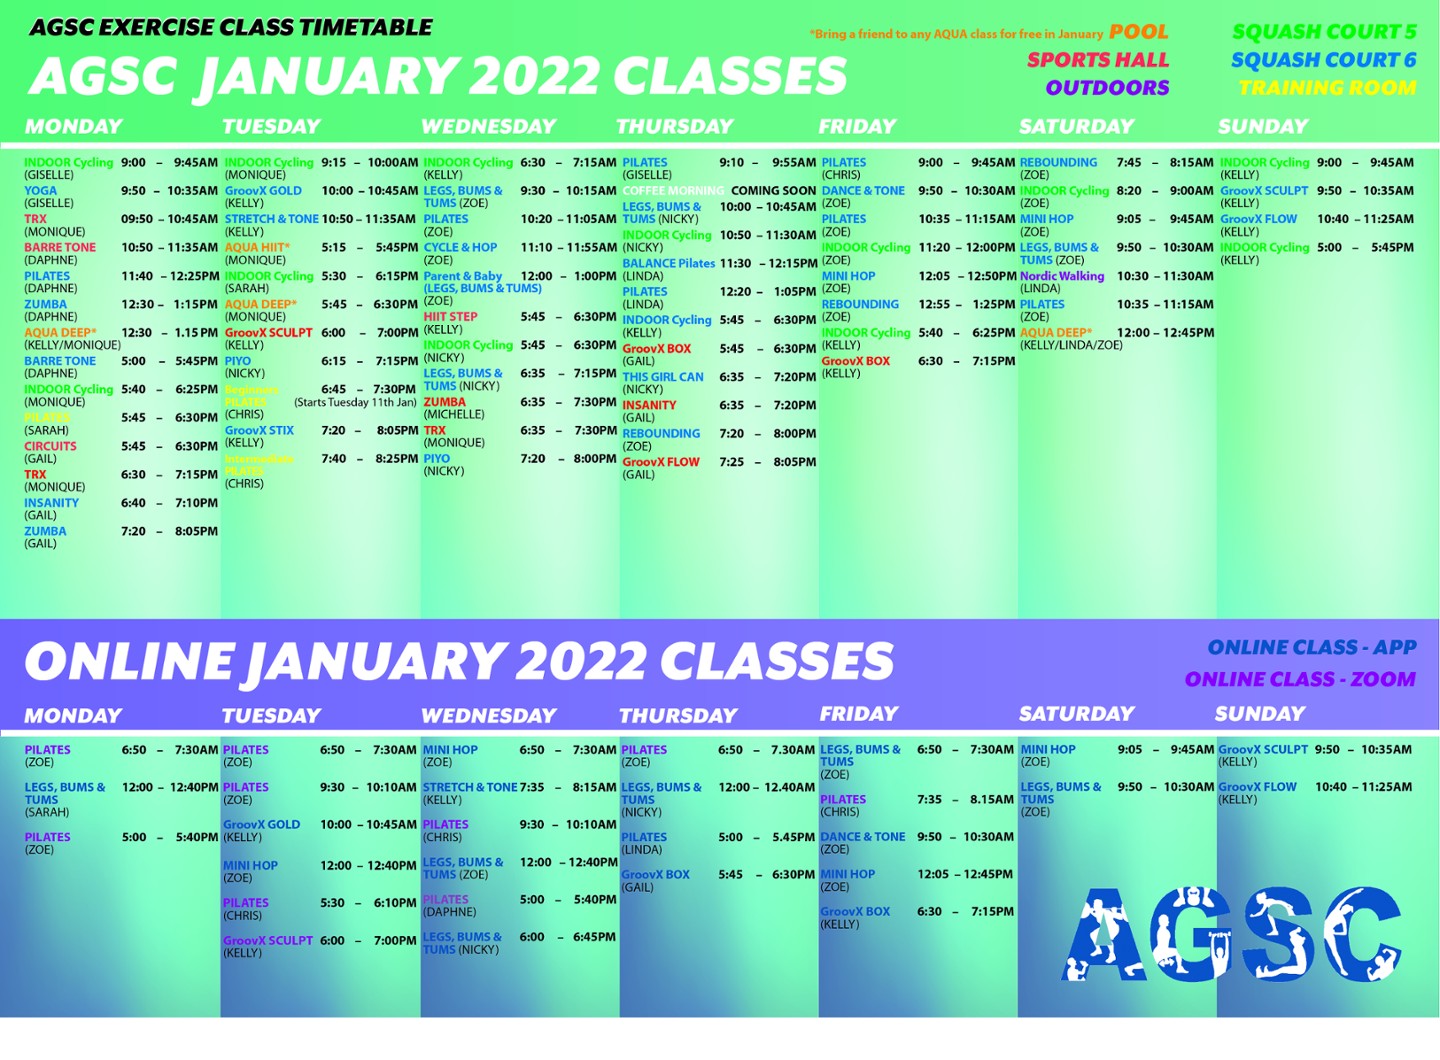 January 2022 Class Timetable - Changes & Cancellations